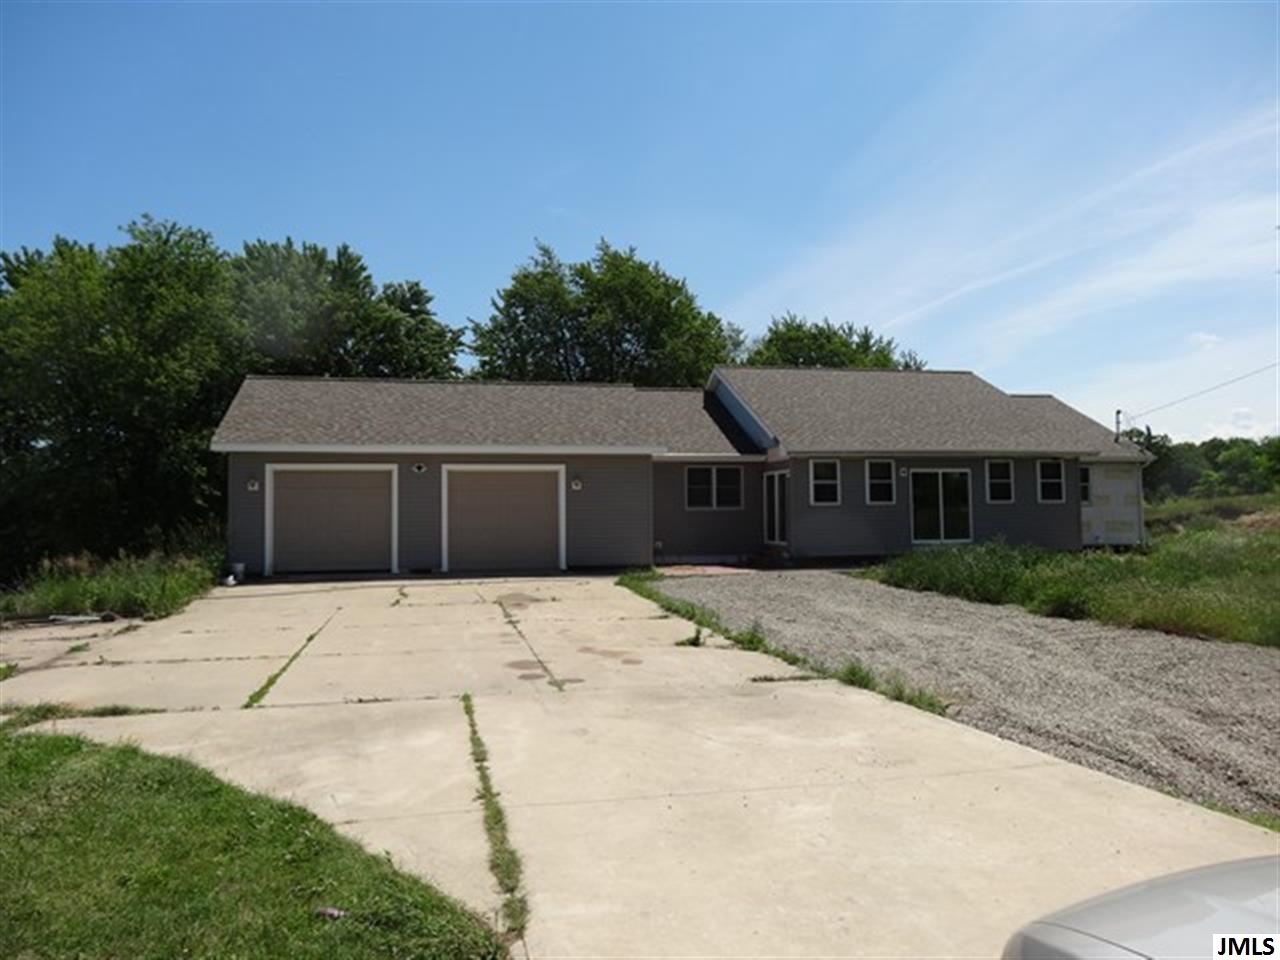  14355 Foster Rd F K A 8701 Sommerset Rd, Cement City, Michigan  photo